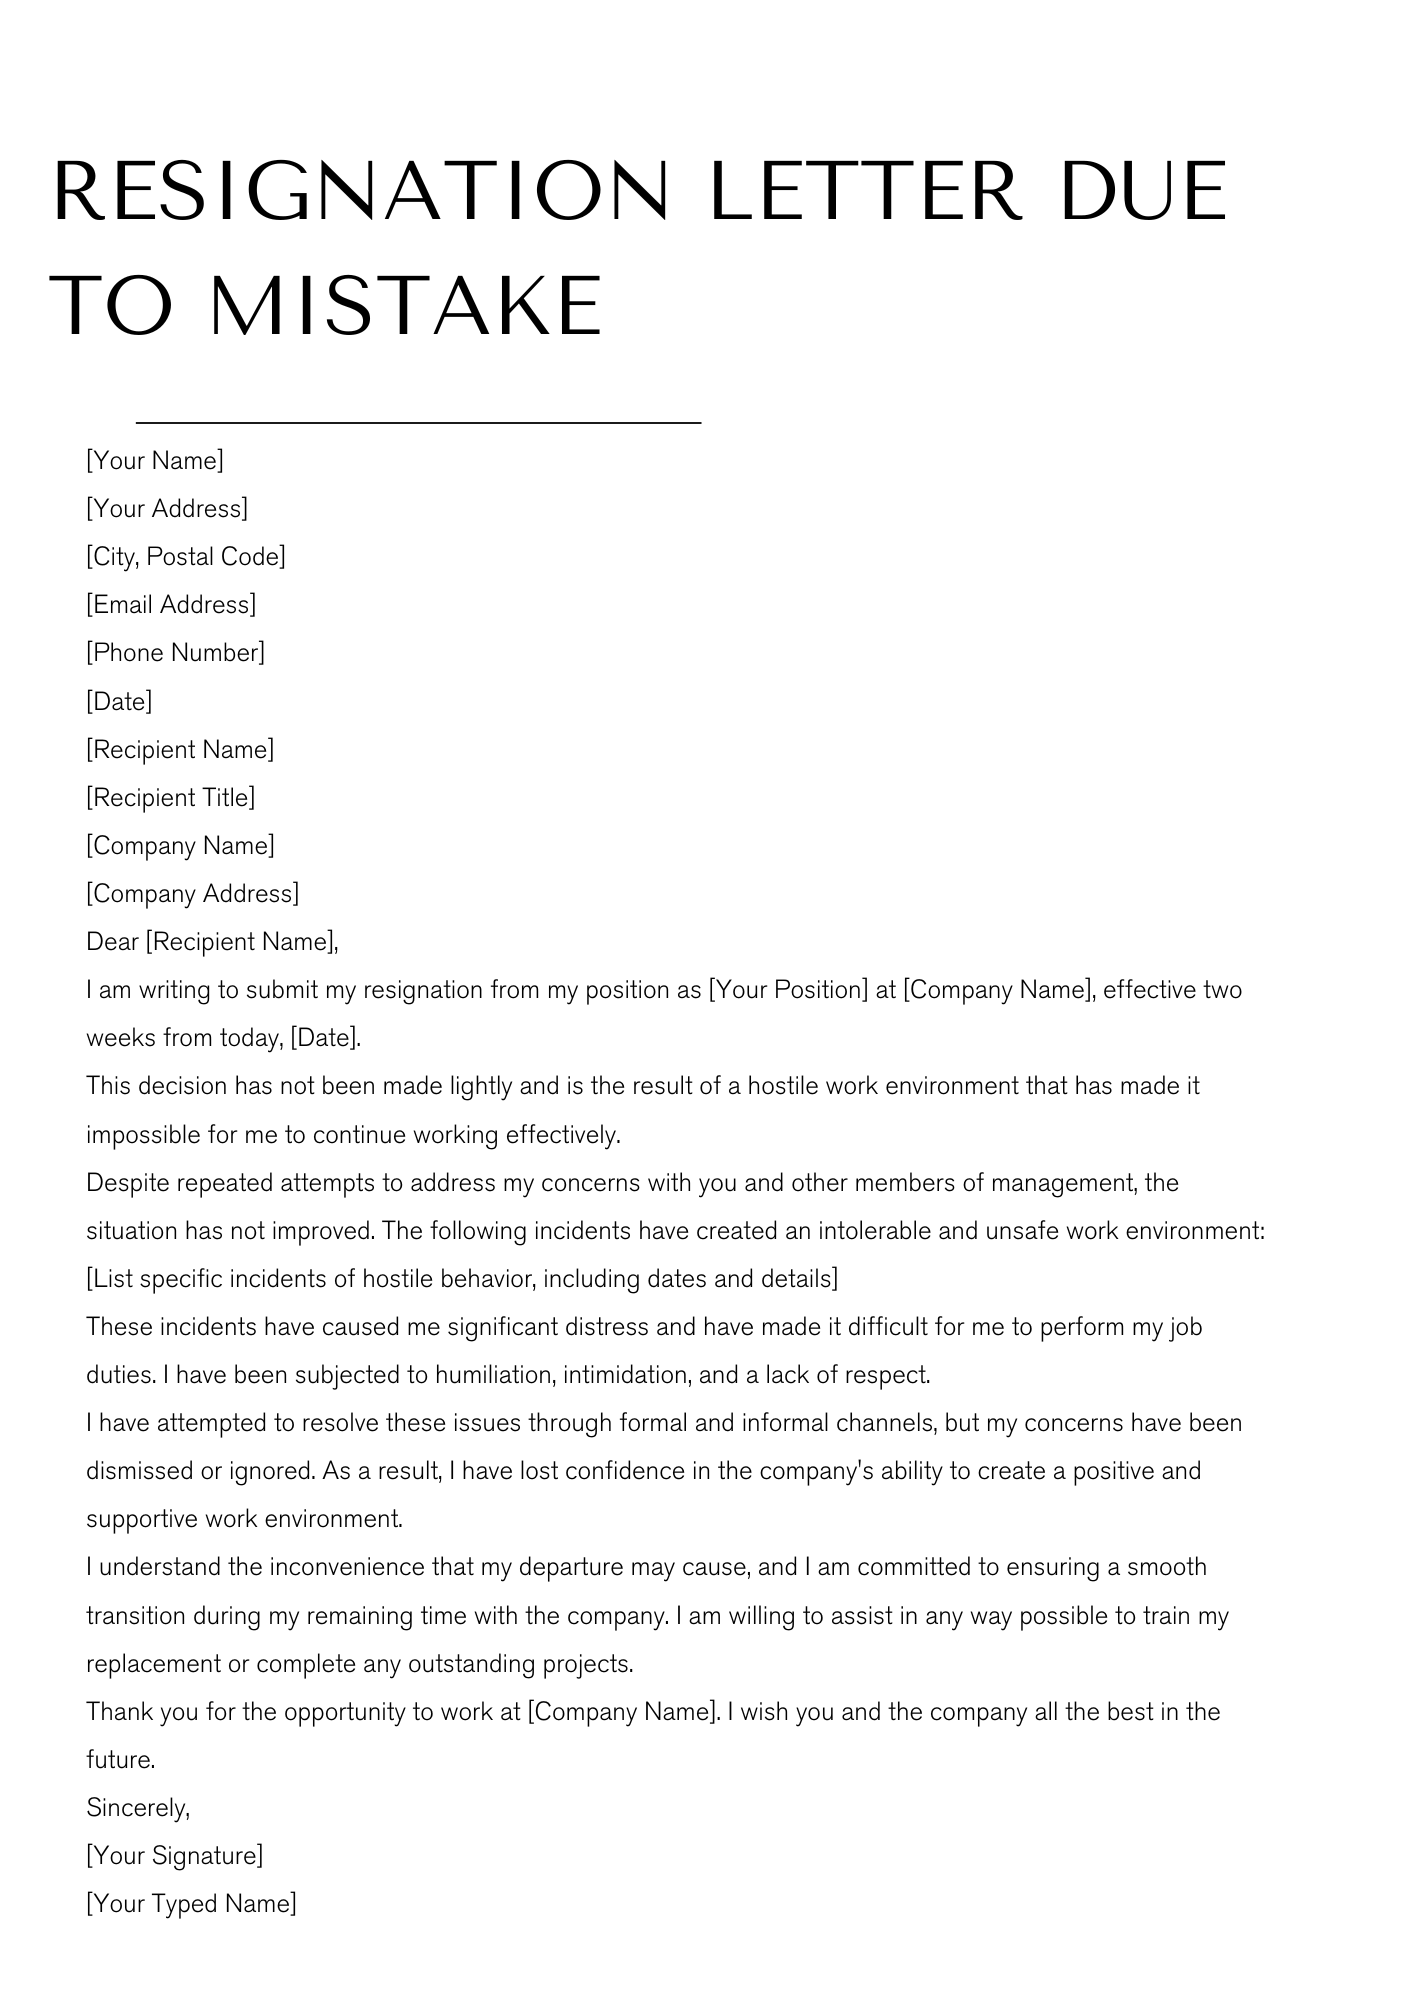 Resignation letter due to mistake